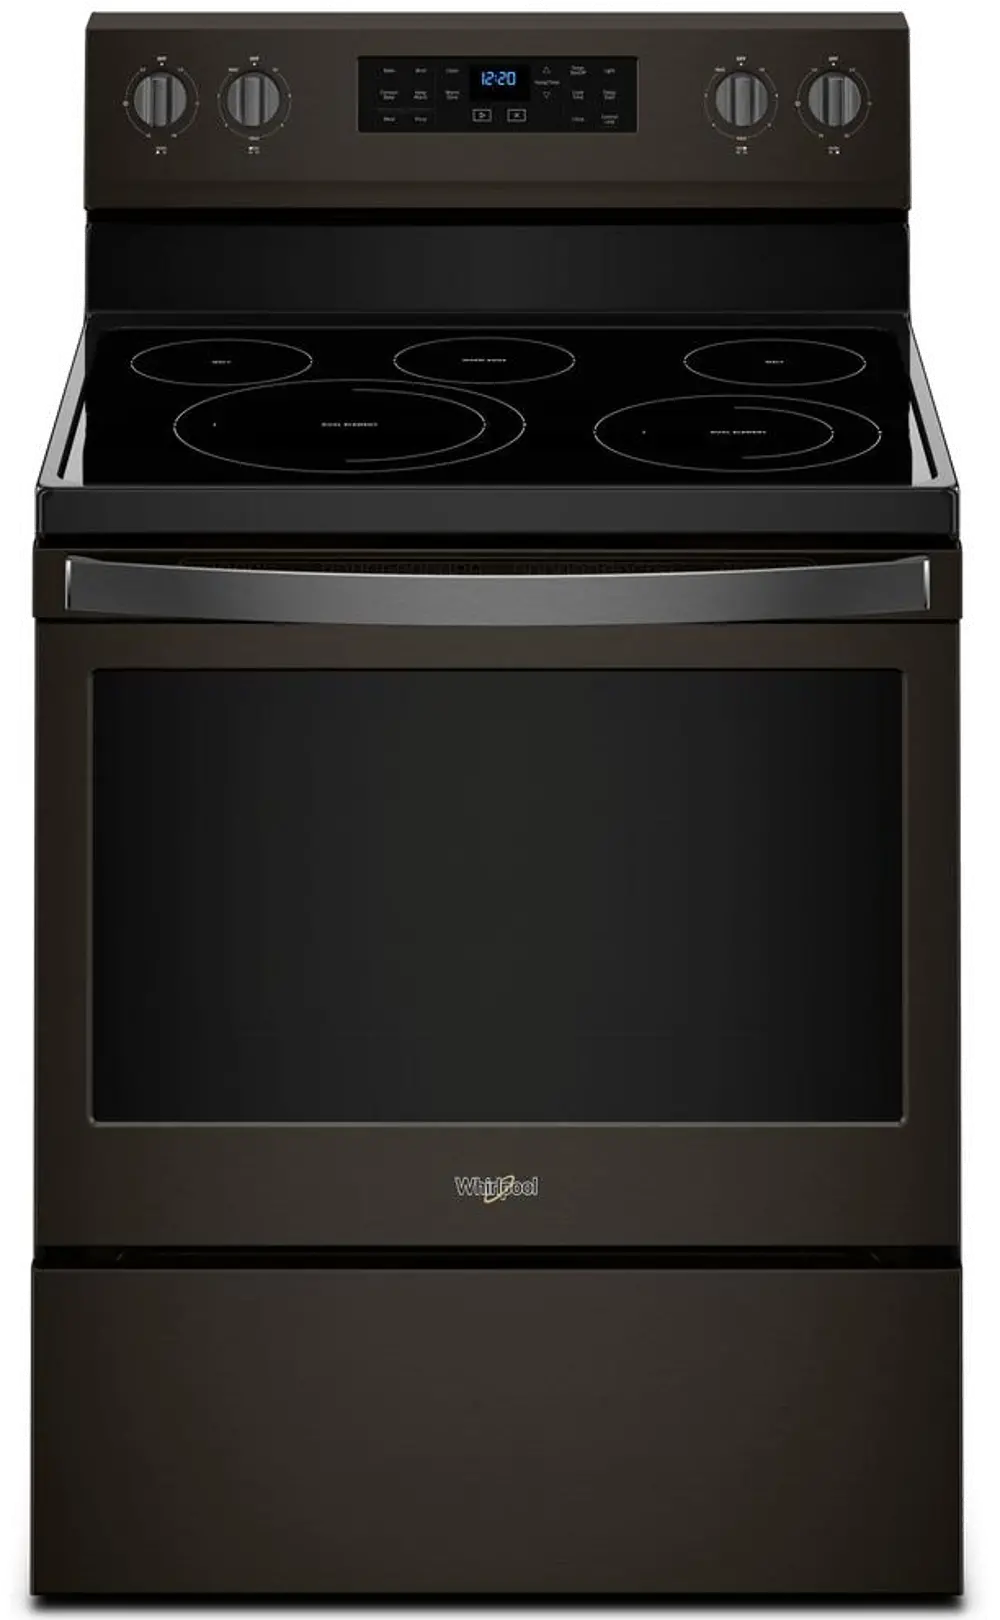 WFE550S0HV Whirlpool 5.3 cu. ft. Freestanding Electric Range with Fan Convection Cooking - Black Stainless Steel Fingerprint Resistance-1